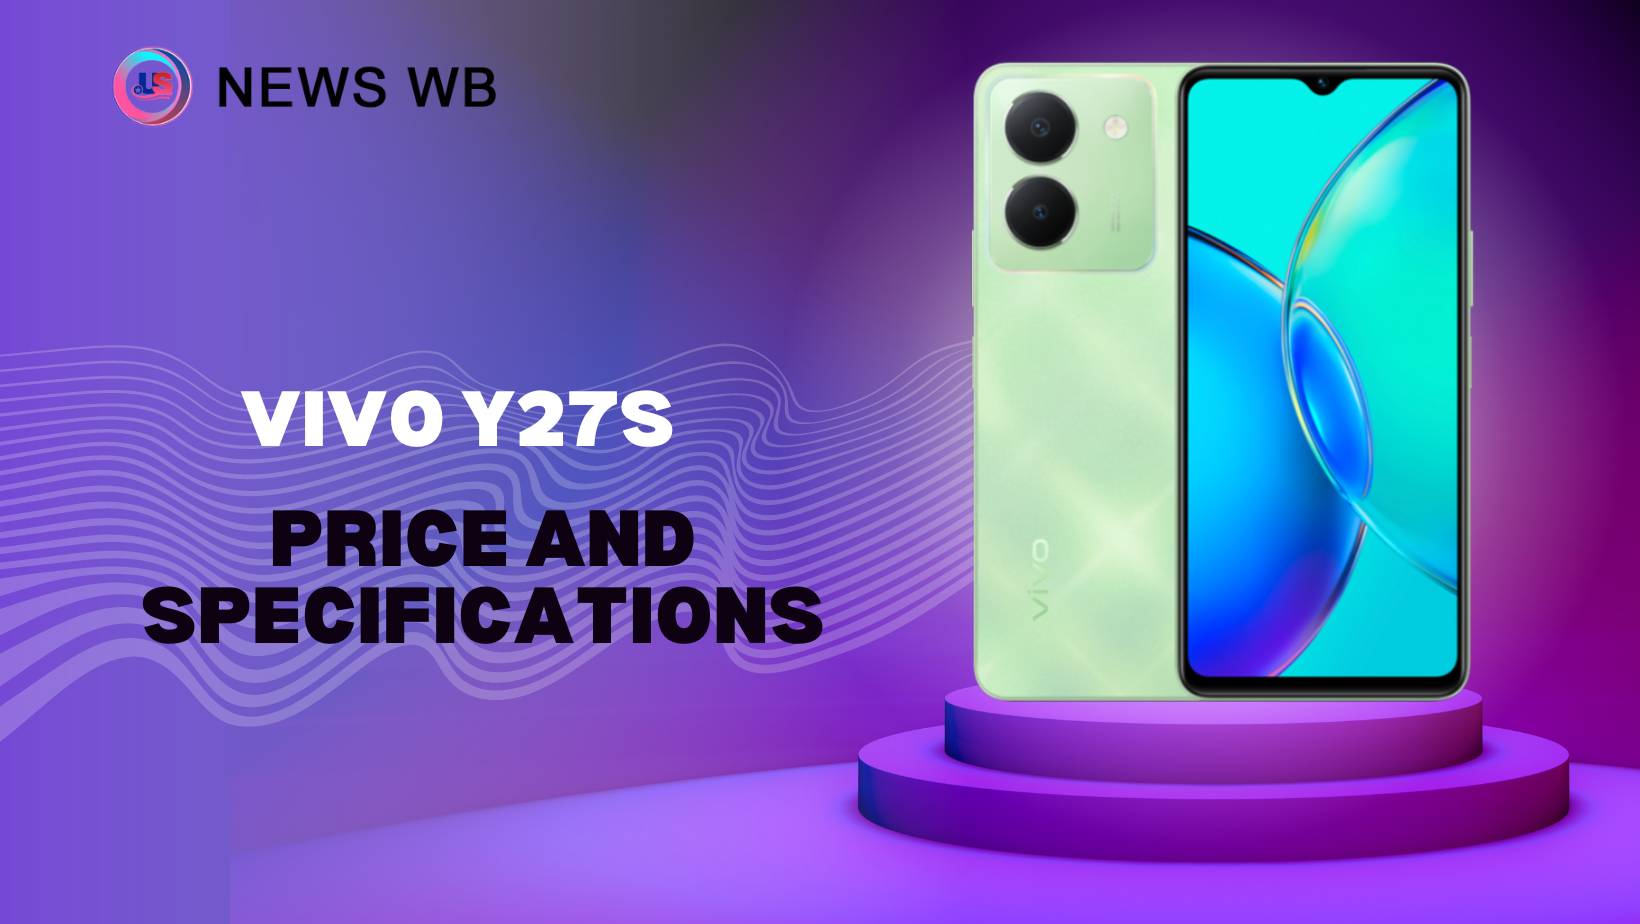 Vivo Y27s Price and Specifications